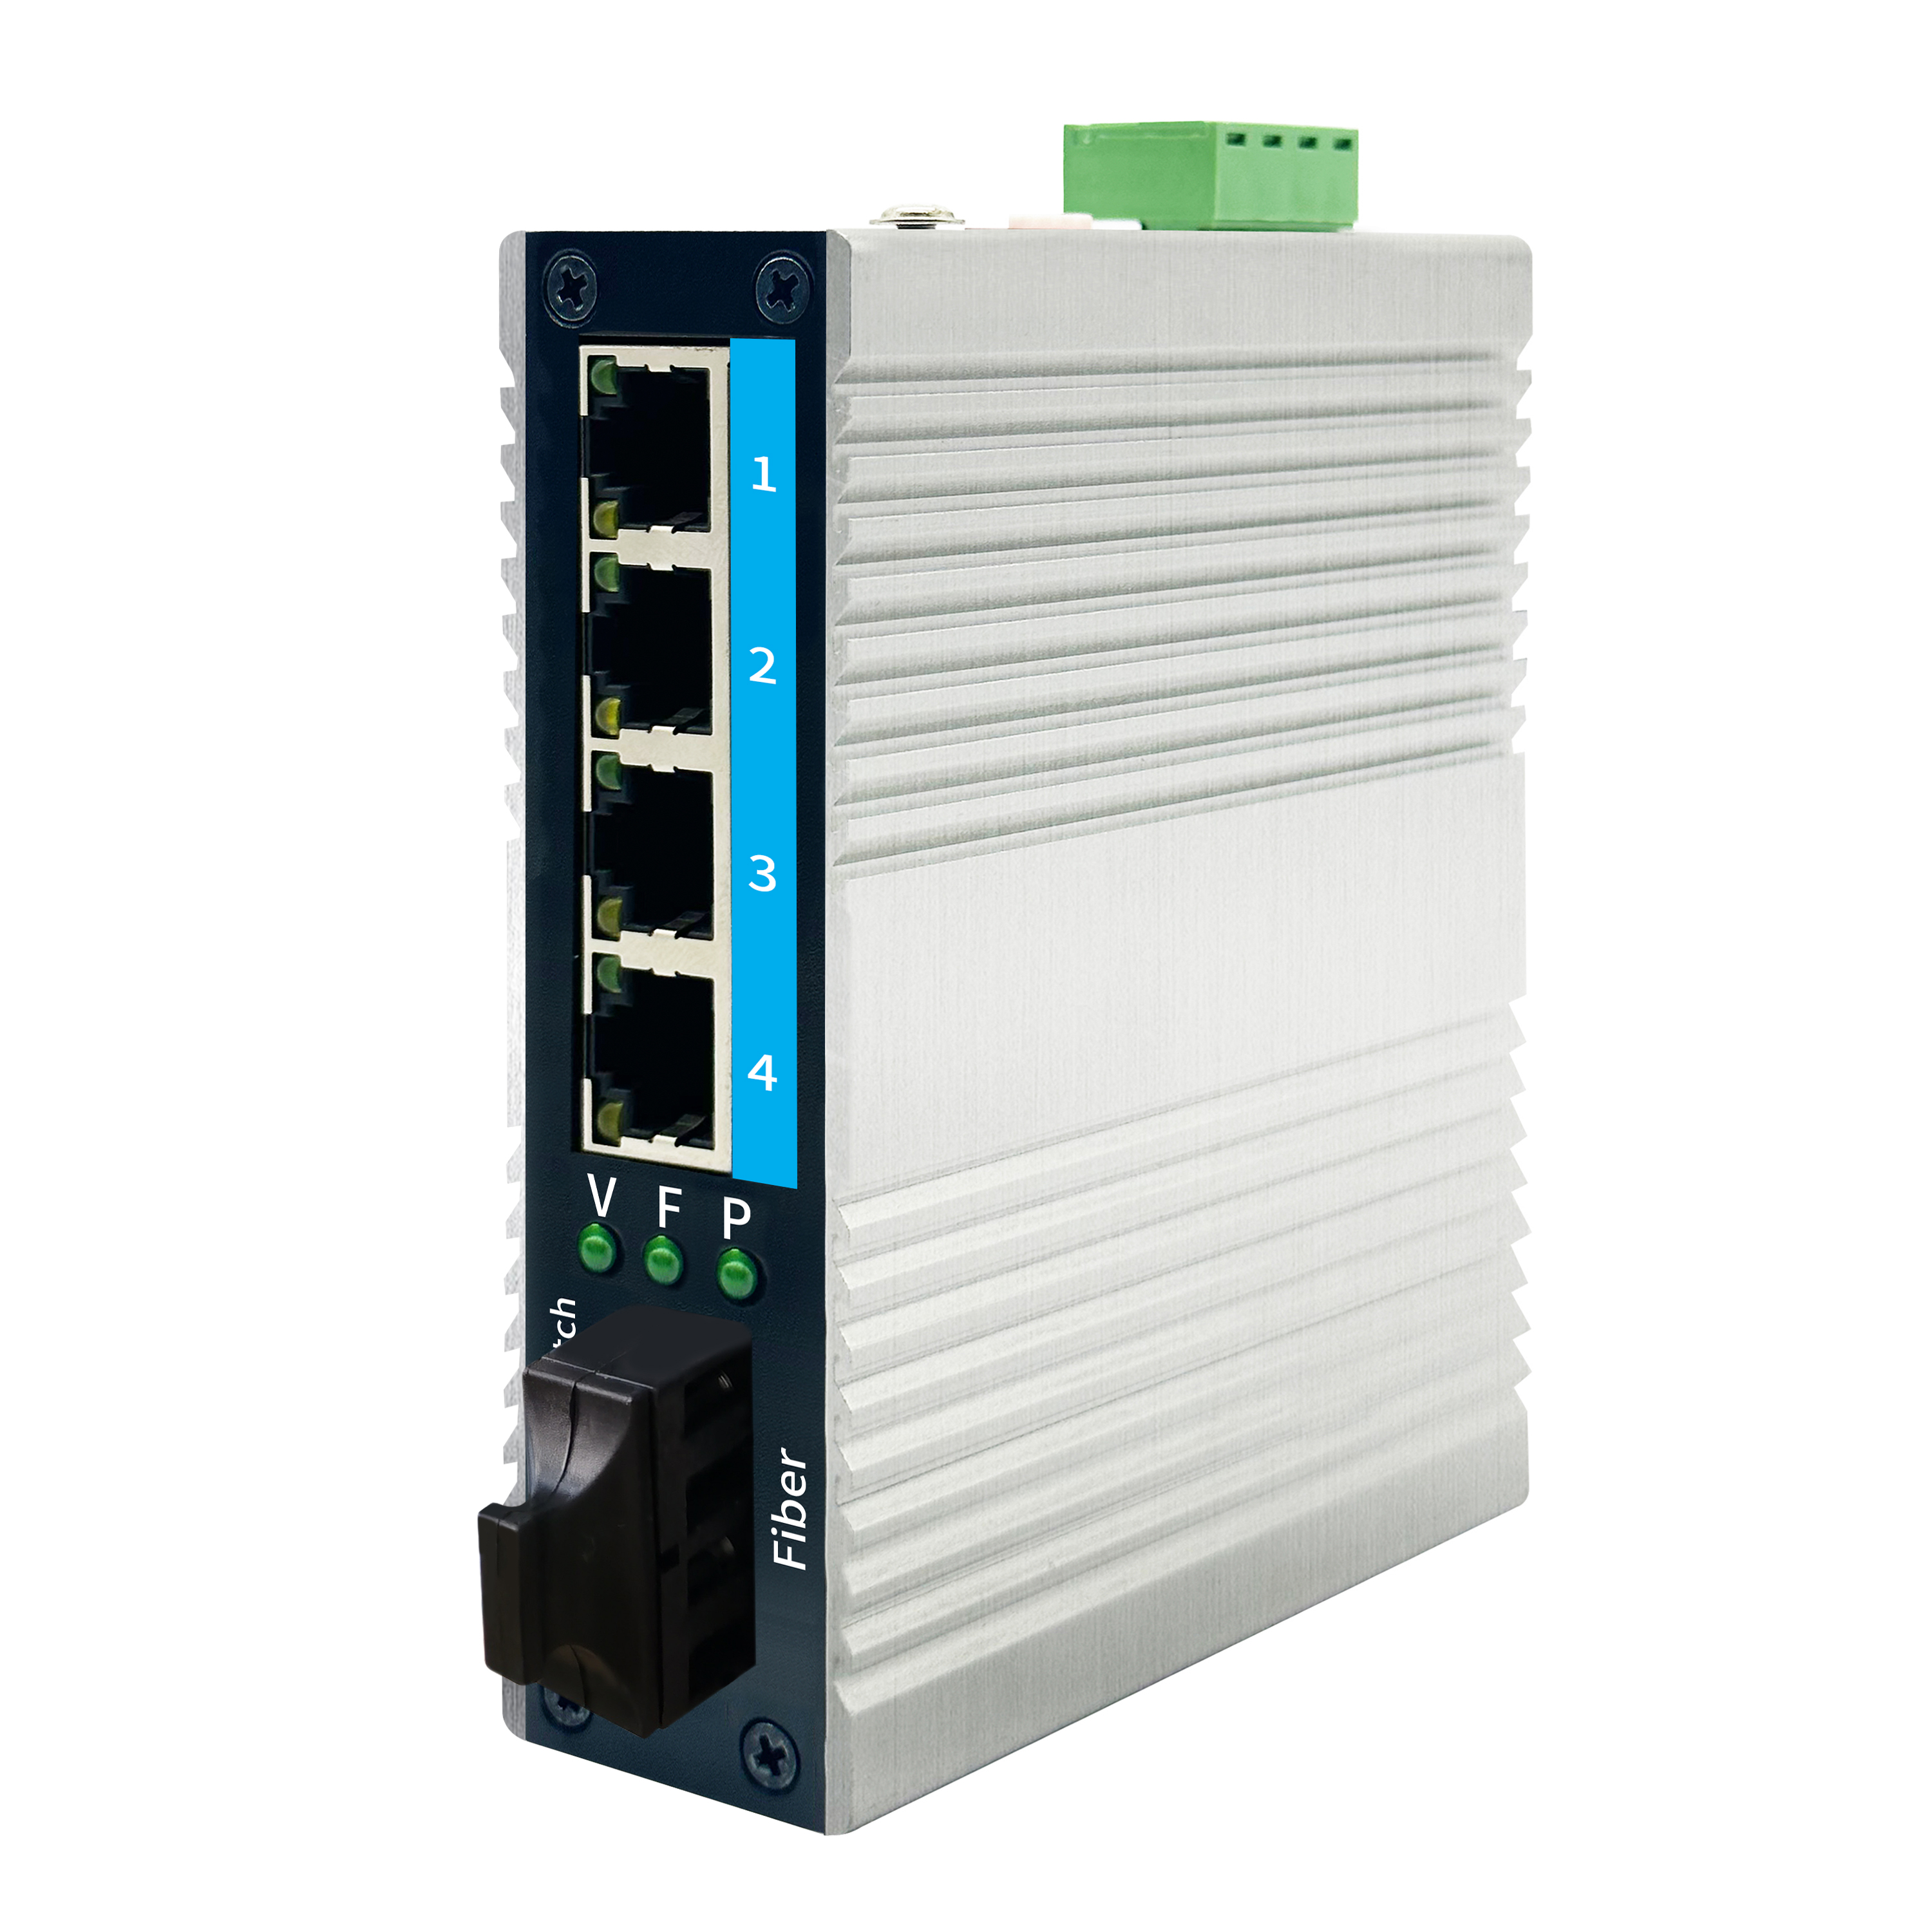 5-port 10/100M/1000M Industrial Ethernet Switch